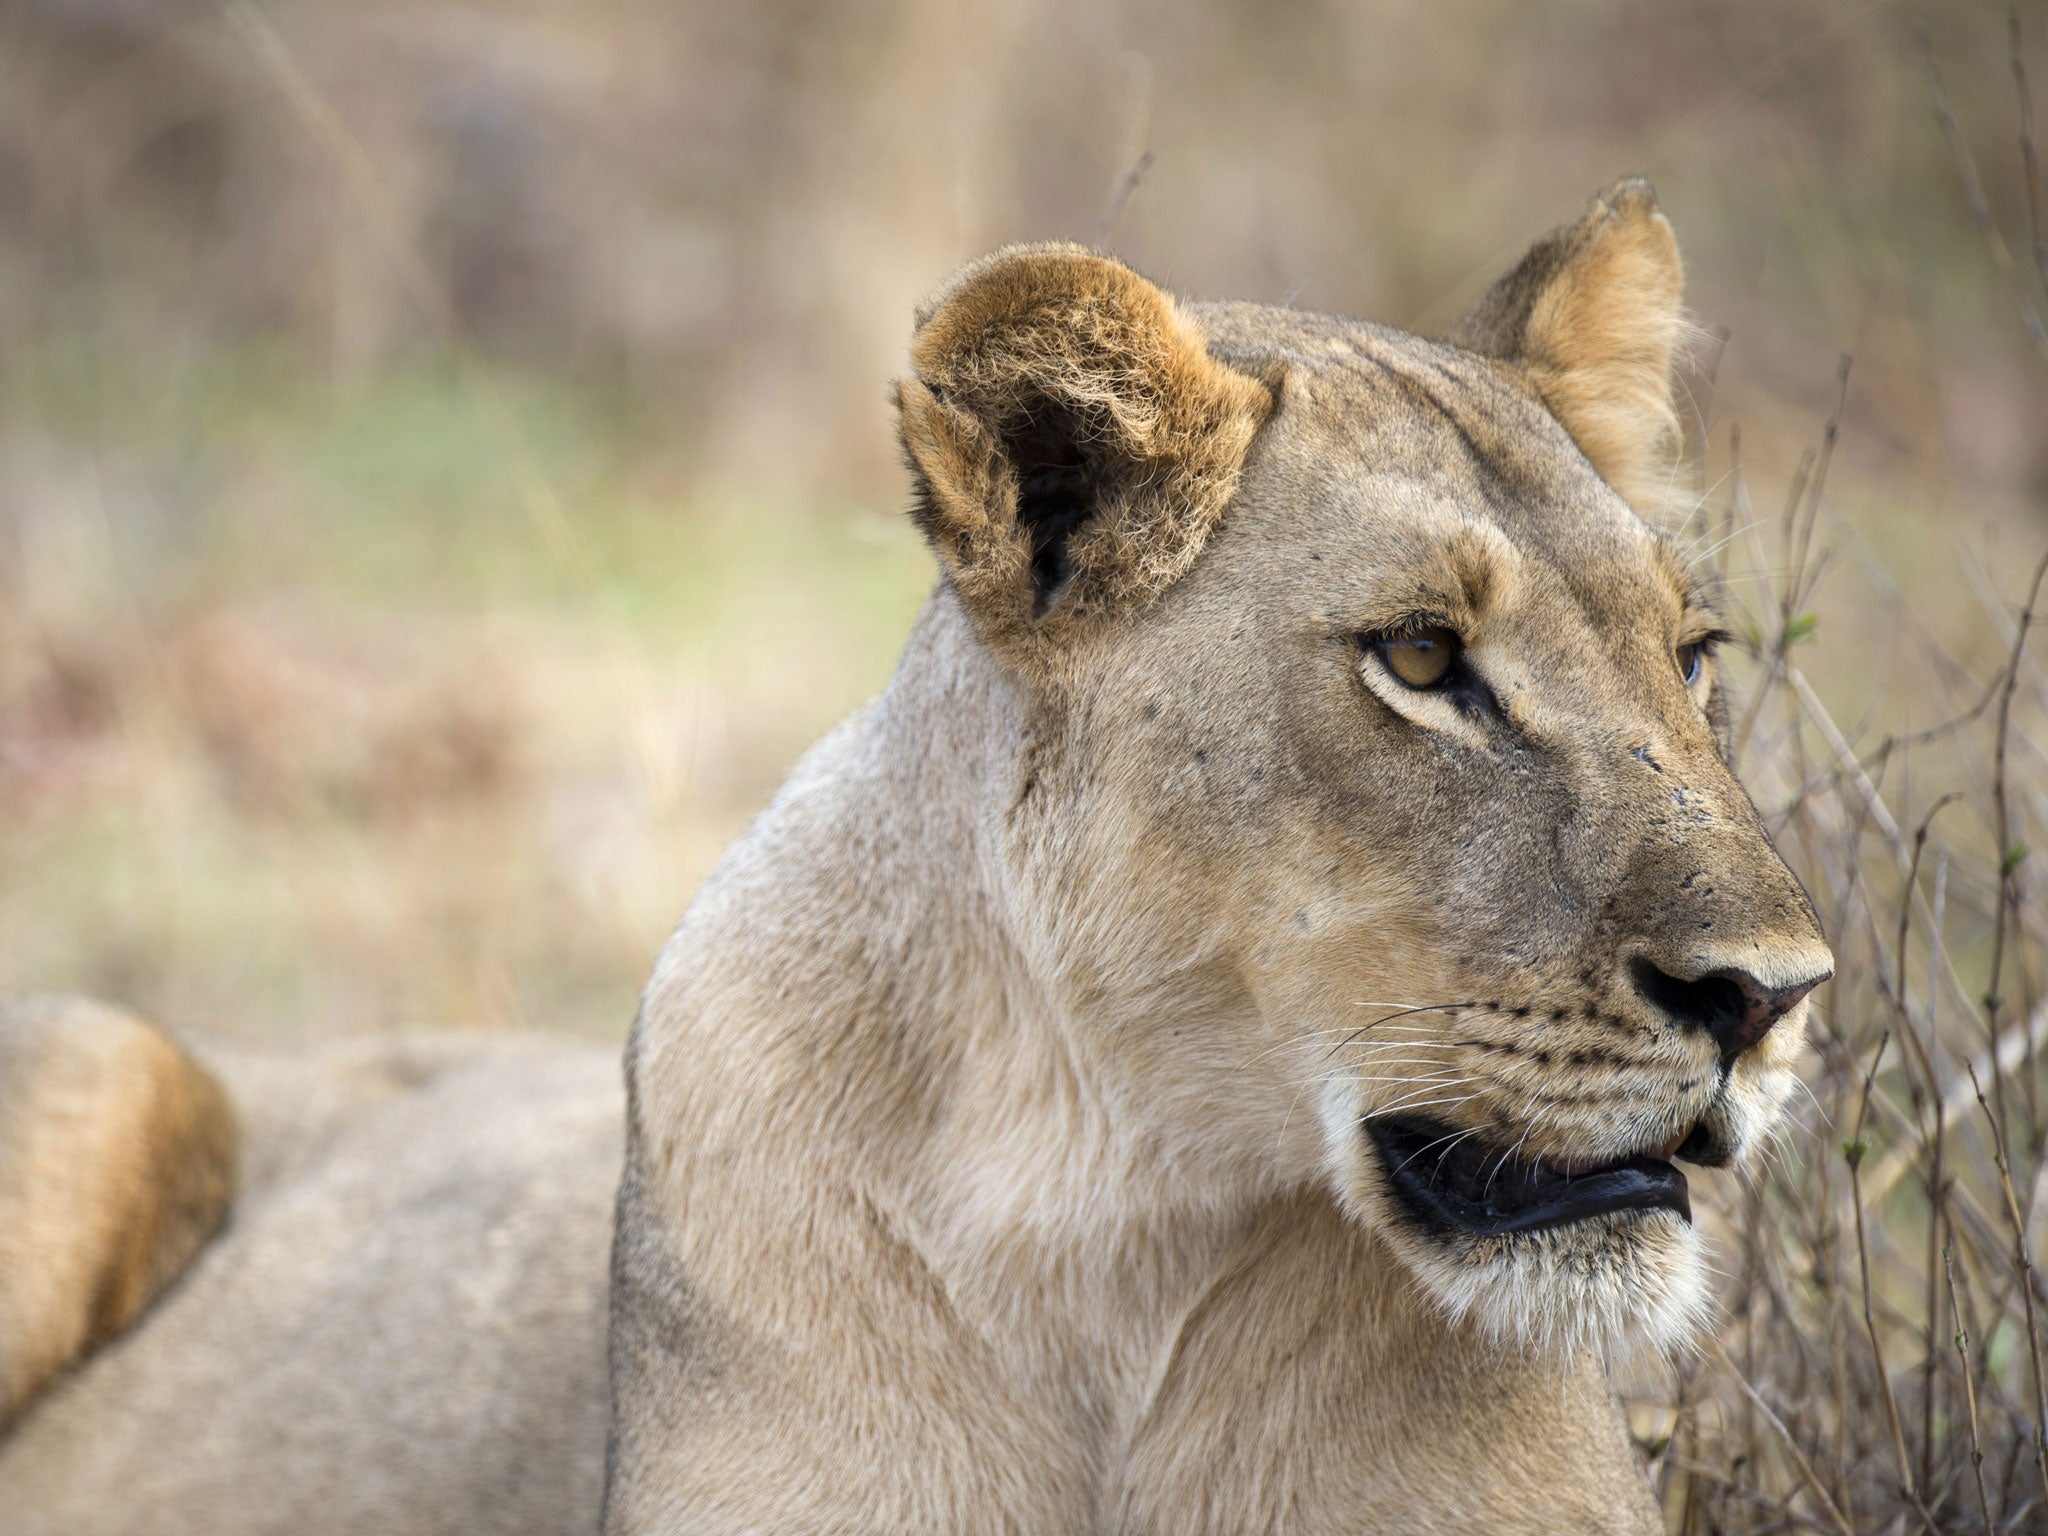 African lions are under threat, as their habitat has shrunk